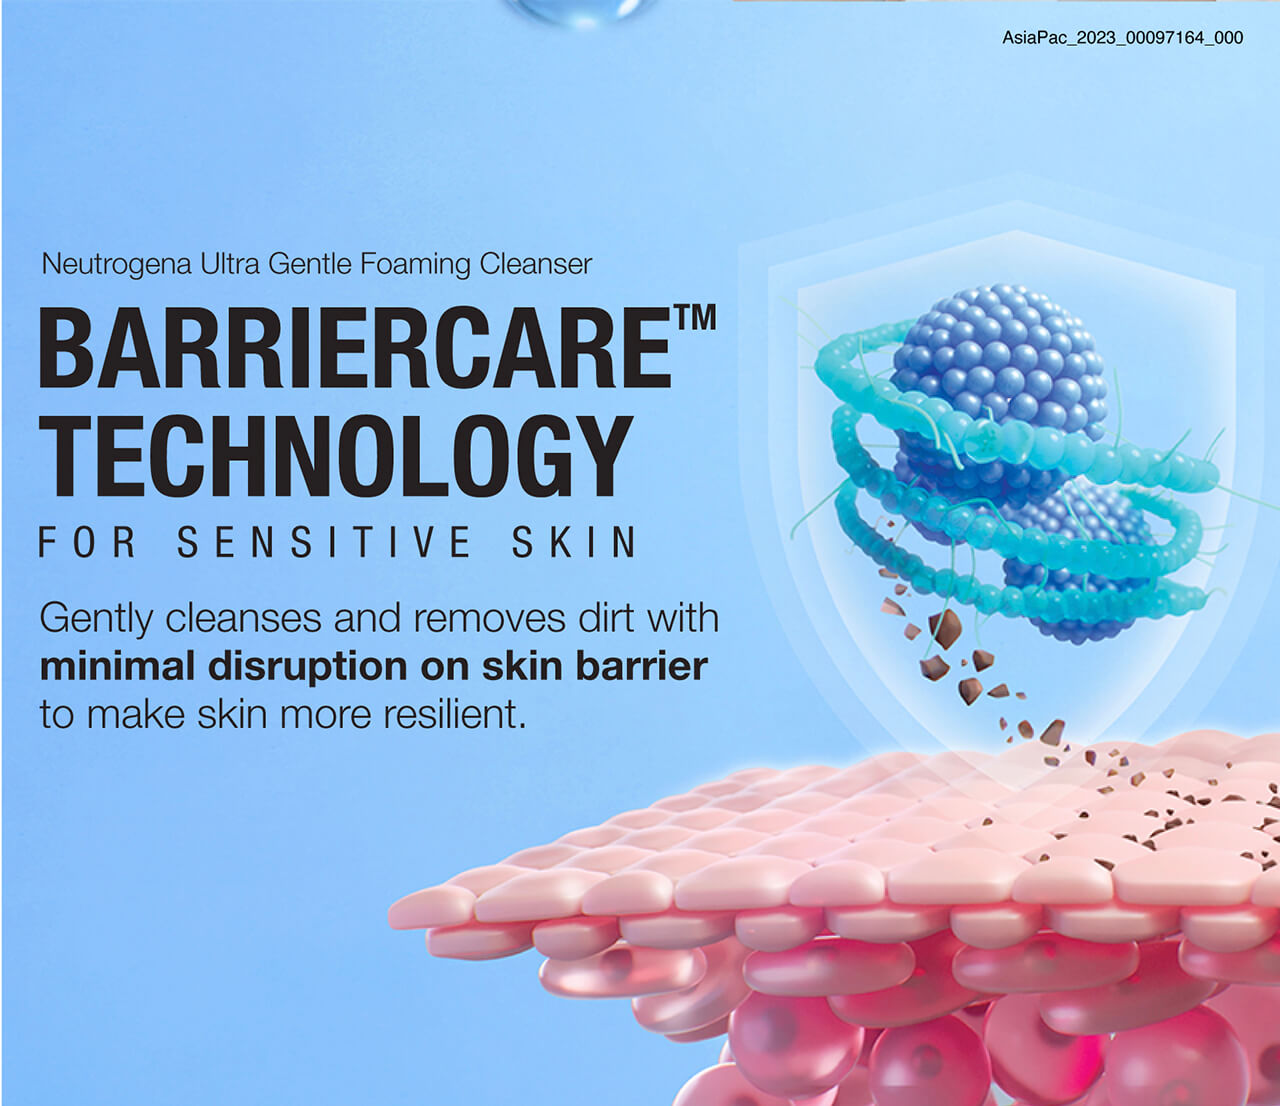 Neutrogena Ultra Gentle Foaming Cleanser BARRIERCARE™ TECHNOLOGY FOR SENSITIVE SKIN  Gently cleanses and removes dirt with minimal disruption on skin barrier to make skin more resilient. 